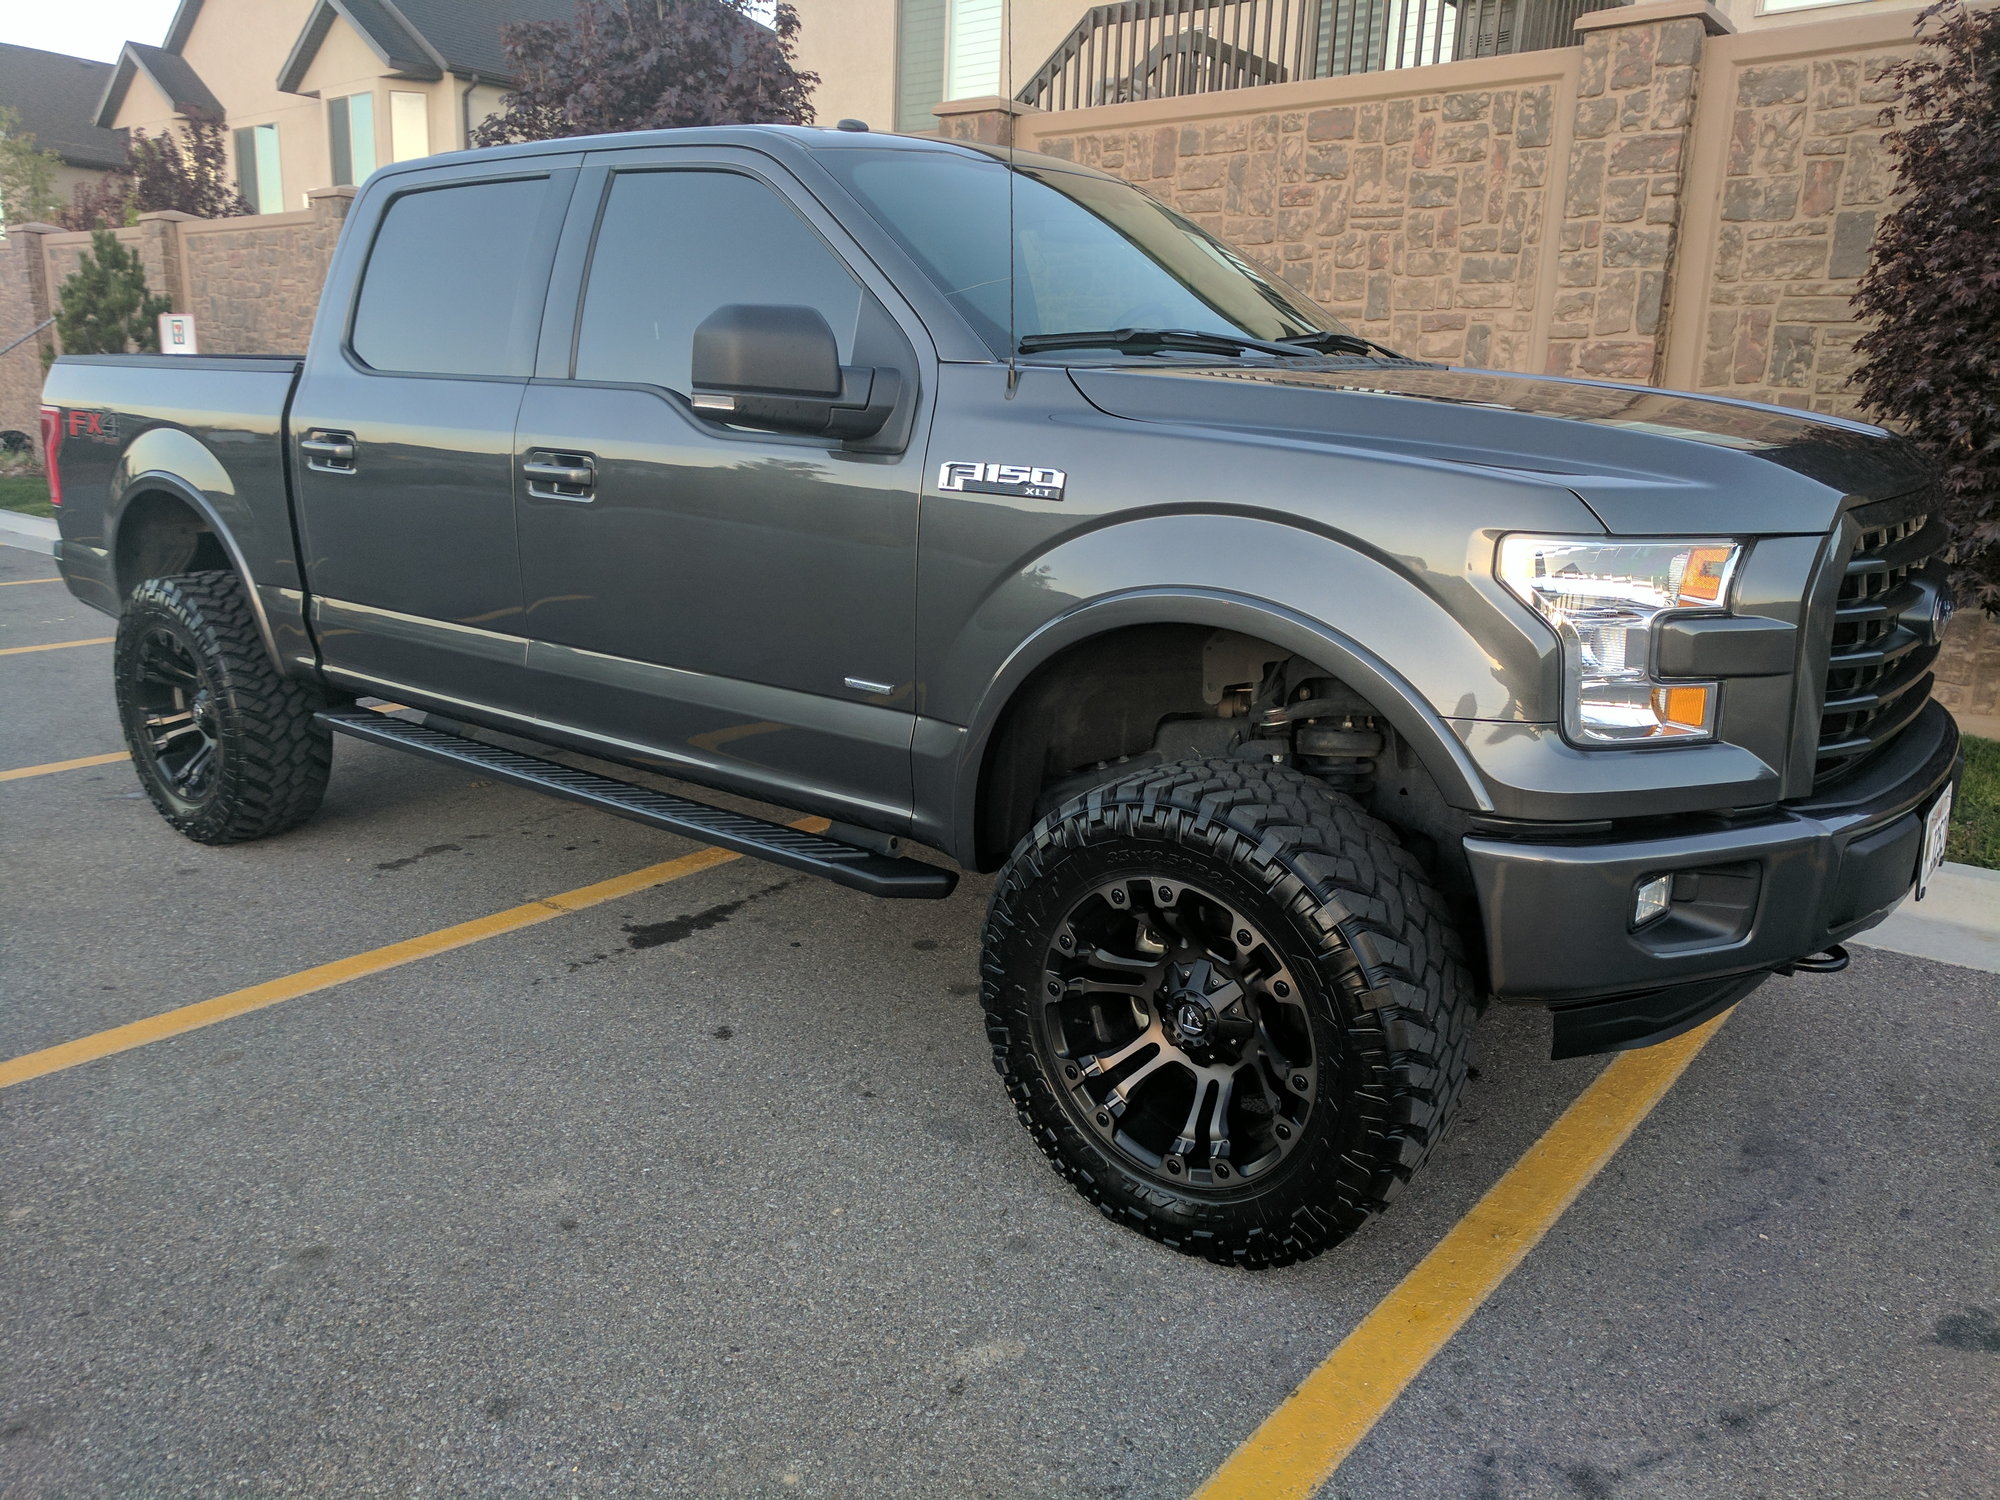 2018 dislikes anyone? - Page 2 - Ford F150 Forum - Community of Ford